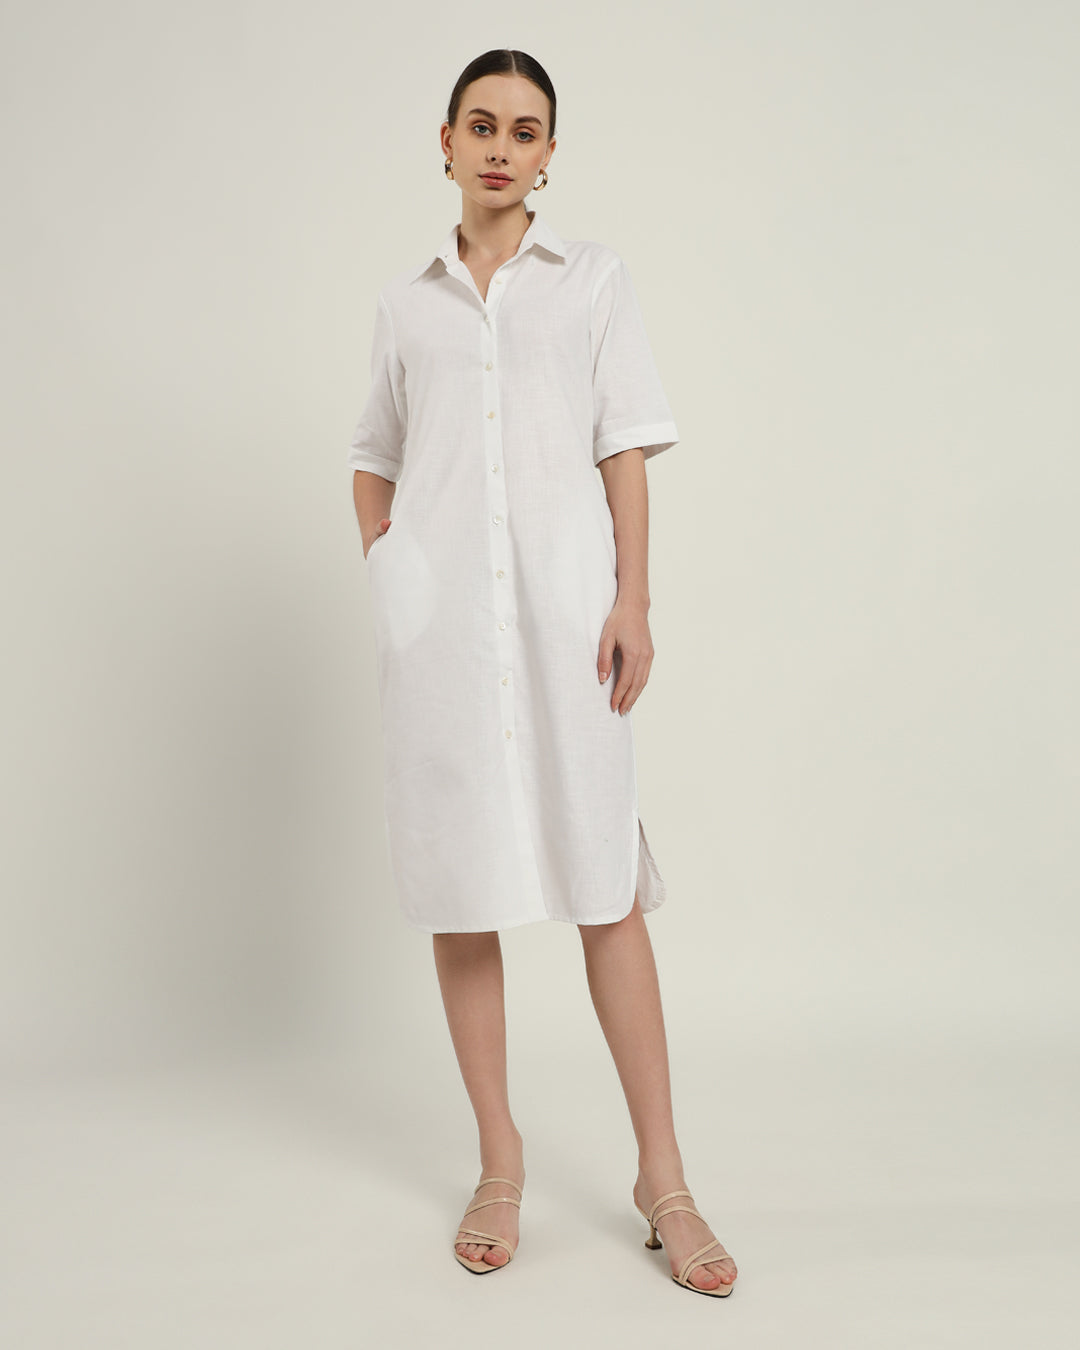 The Tampa Daisy White Linen Dress